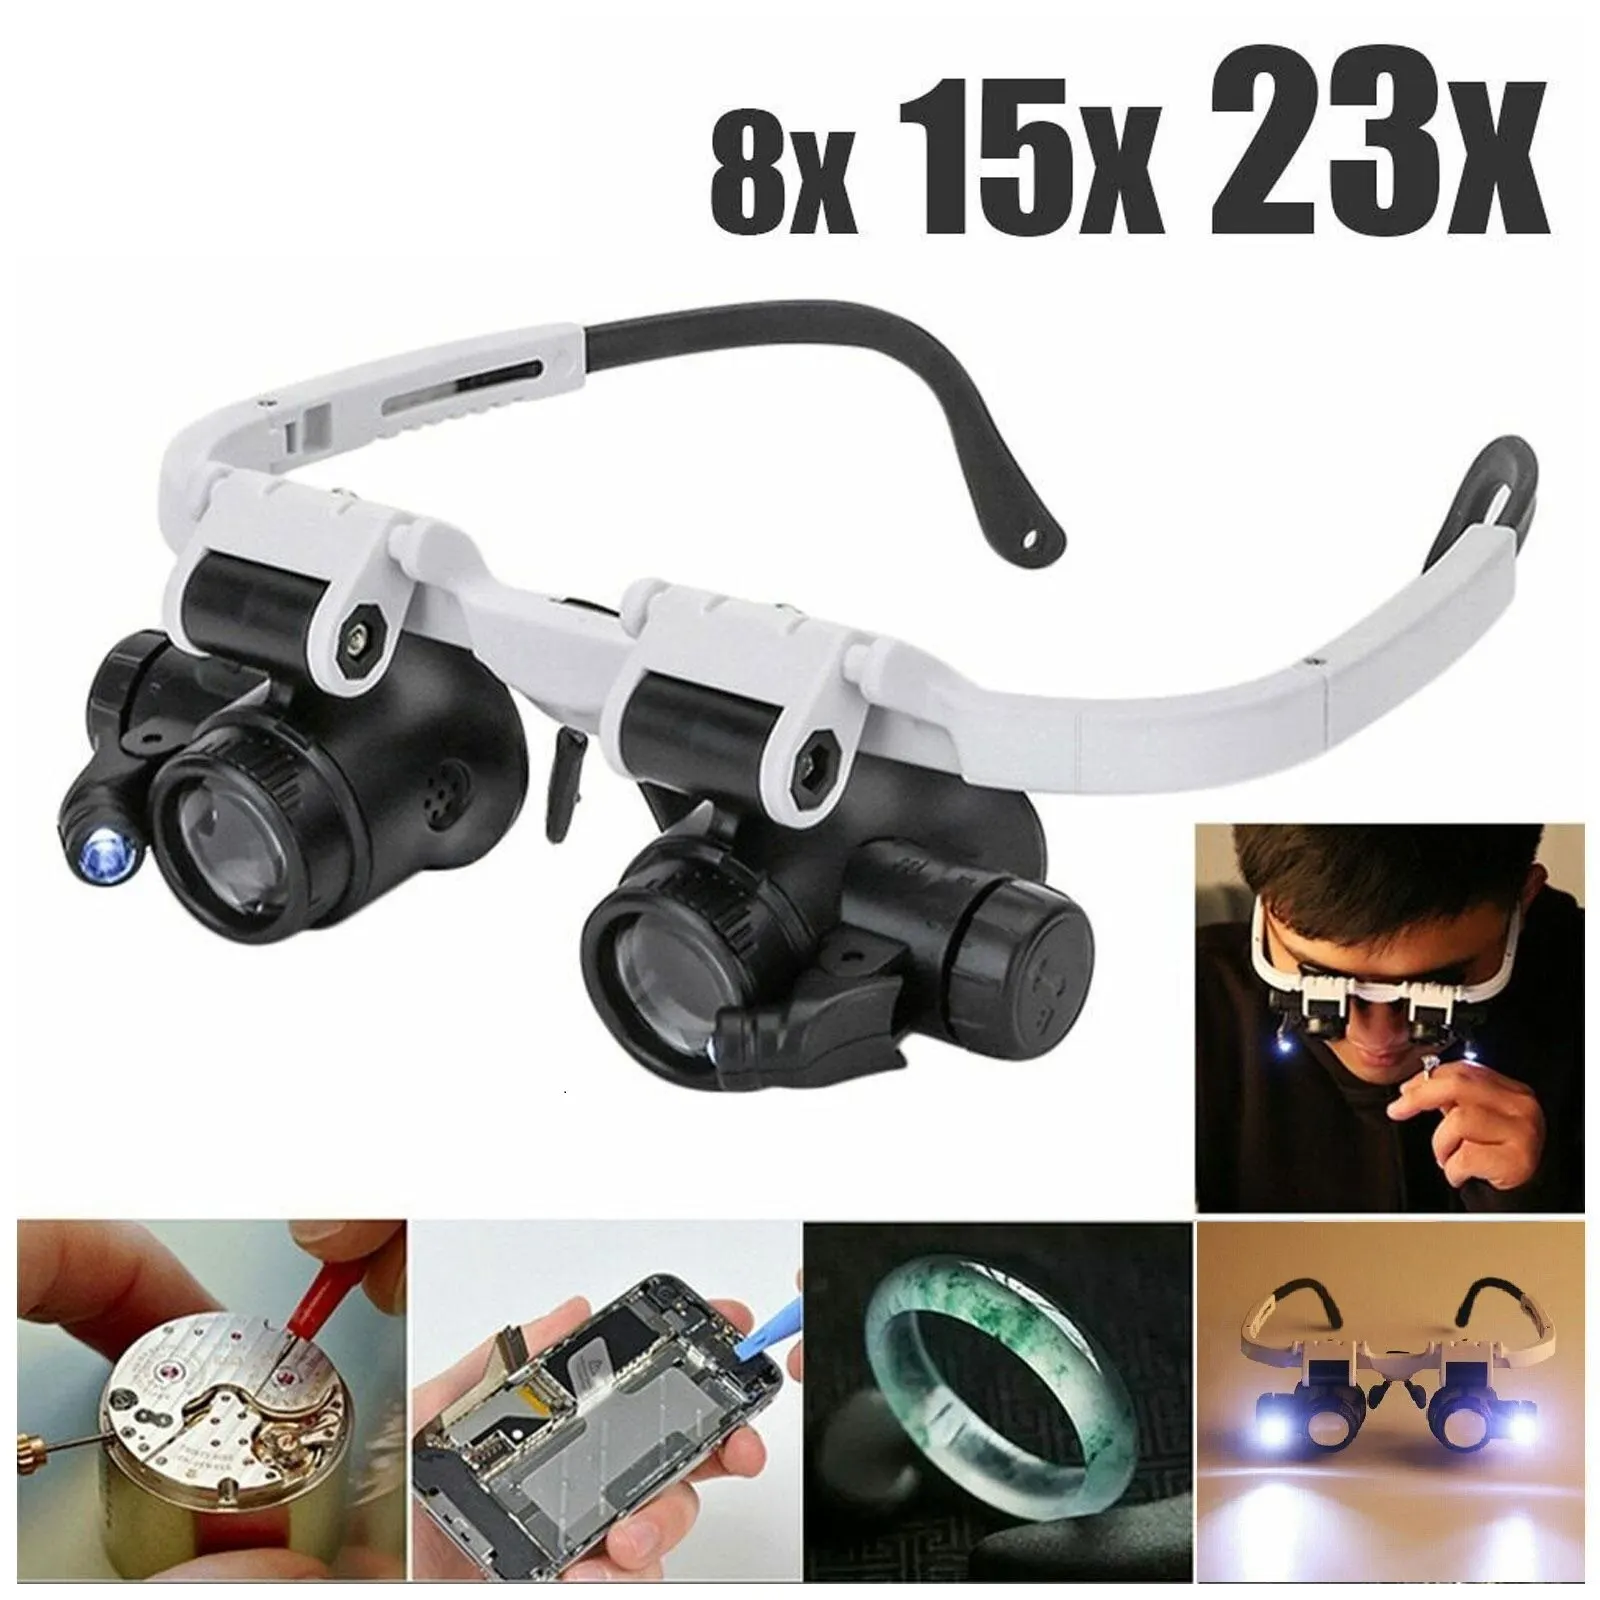 2XLED Watch Jeweler Repair Magnifier Head-Mounted Headband Adjustable Magnifying Head Eye Glasses Loupe Lens 8X 15X 23X-animated-img